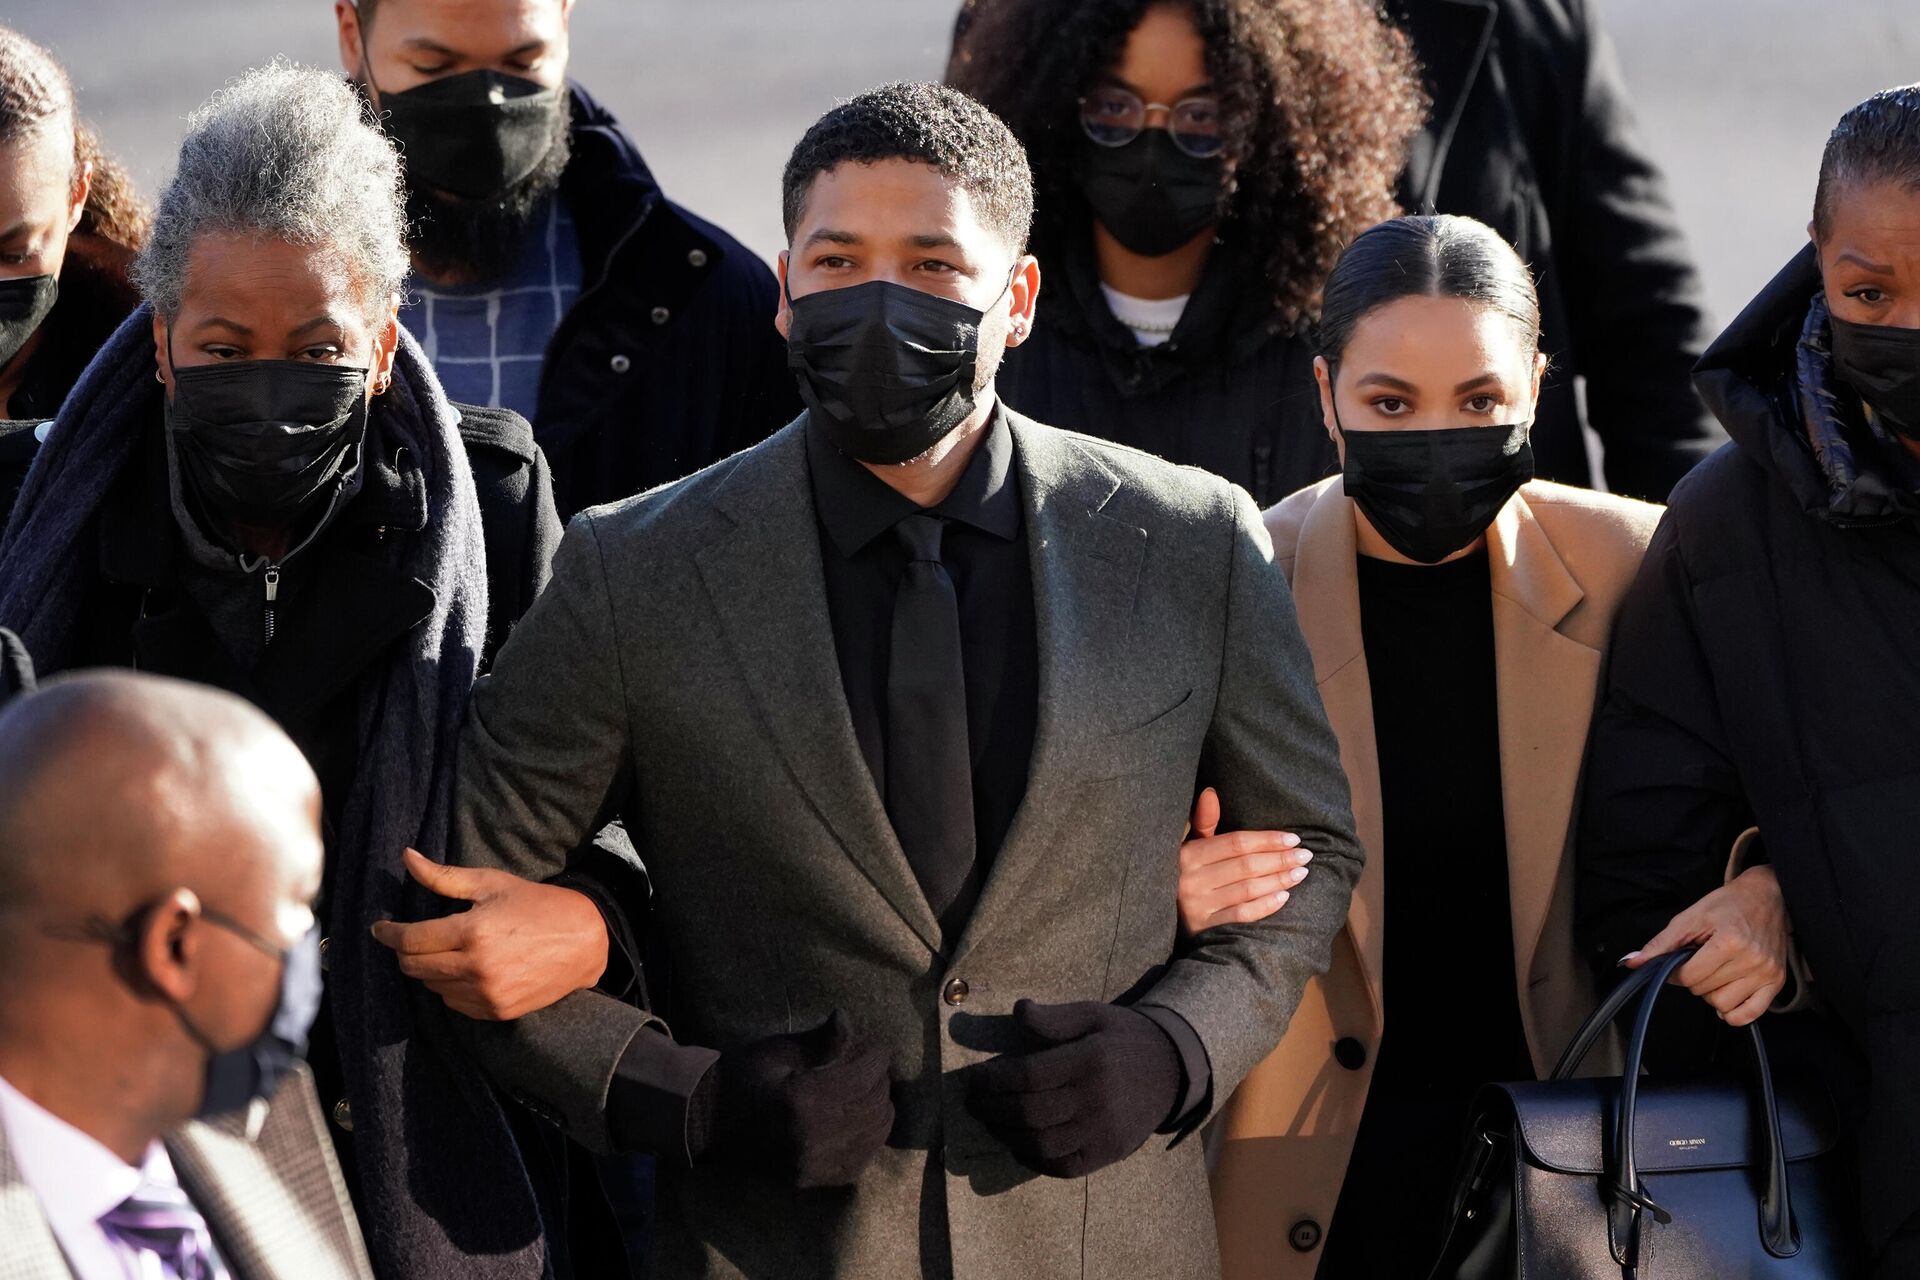 Actor Jussie Smollett, center, arrives Tuesday, Nov. 30, 2021, at the Leighton Criminal Courthouse for day two of his trial in Chicago. - Sputnik International, 1920, 17.03.2022